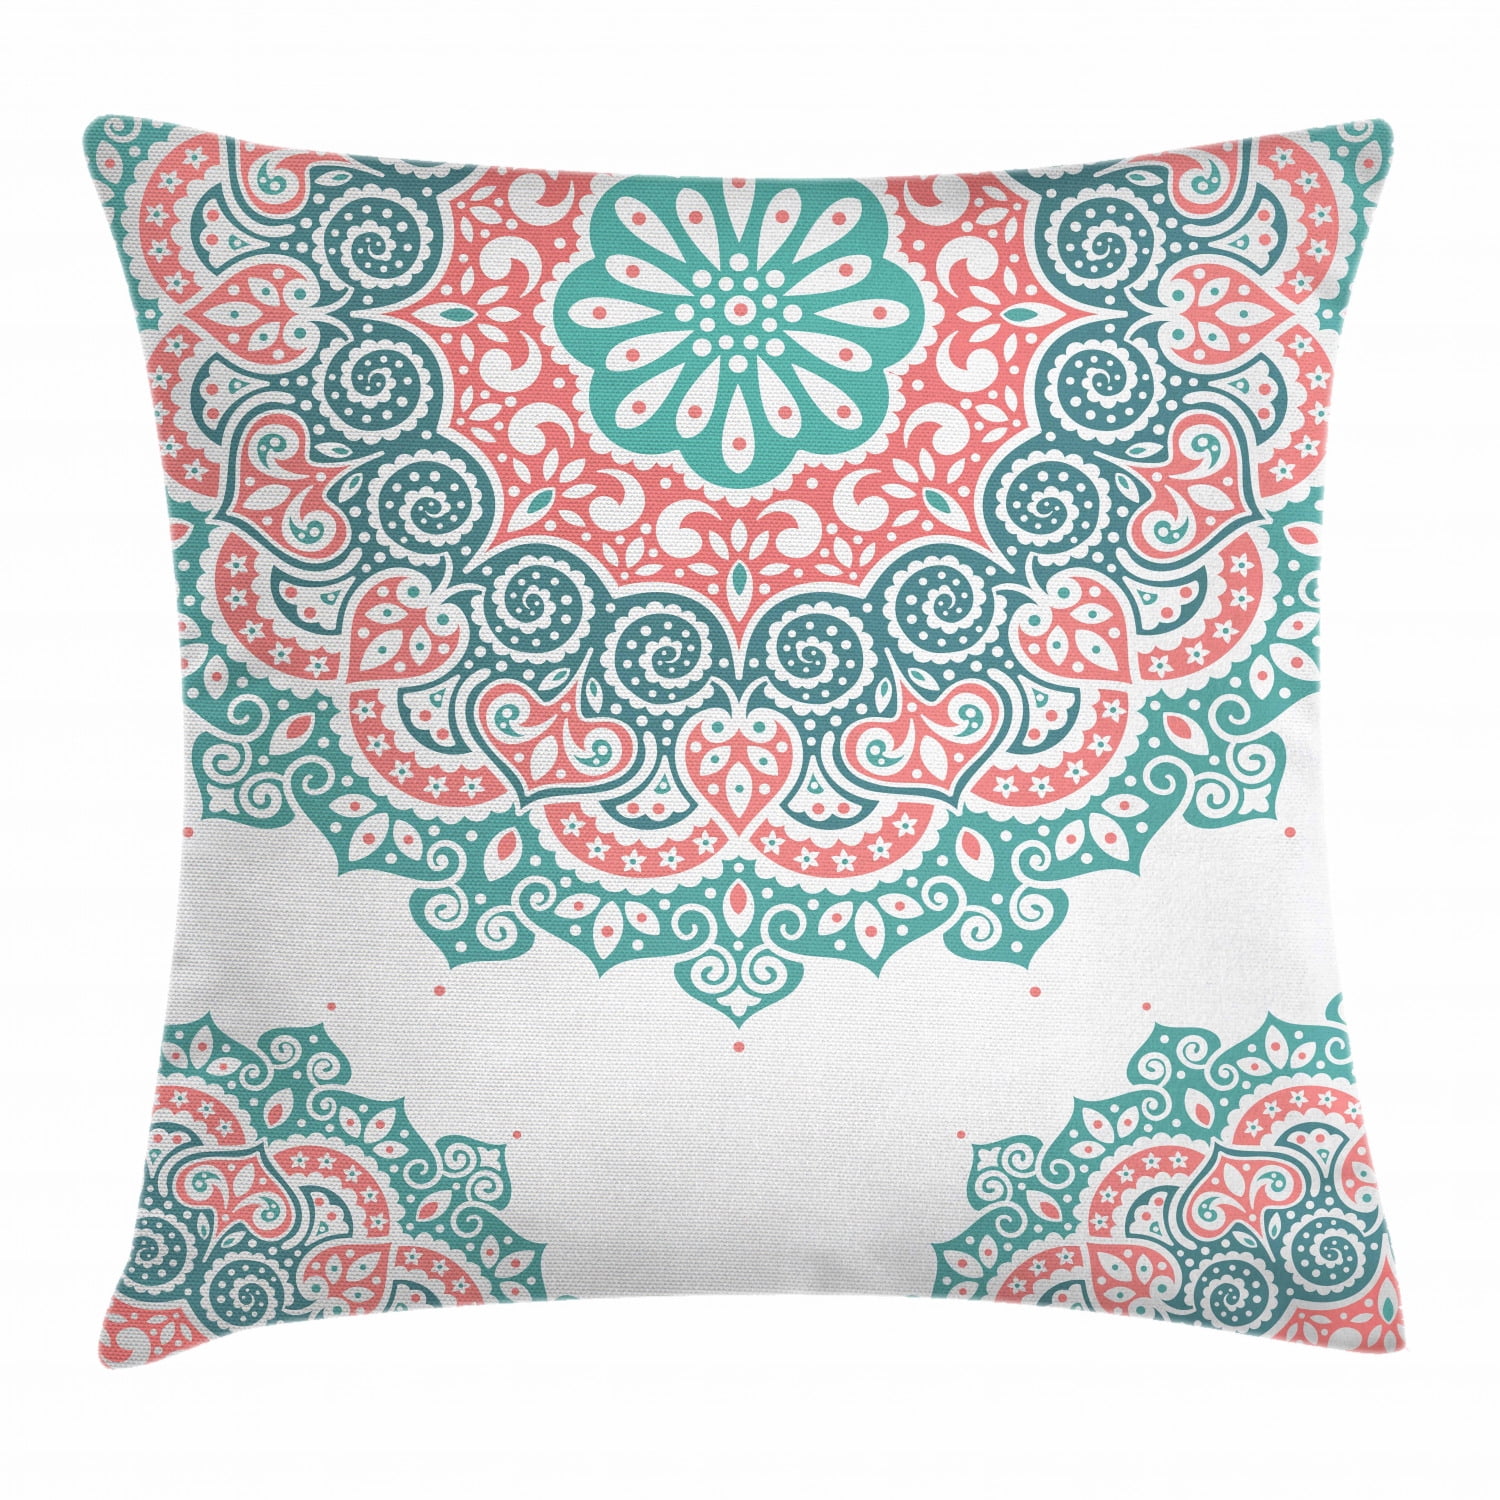 Ethnic Throw Pillow Case Three Turtles Ornamental Square Cushion Cover 16 Inches